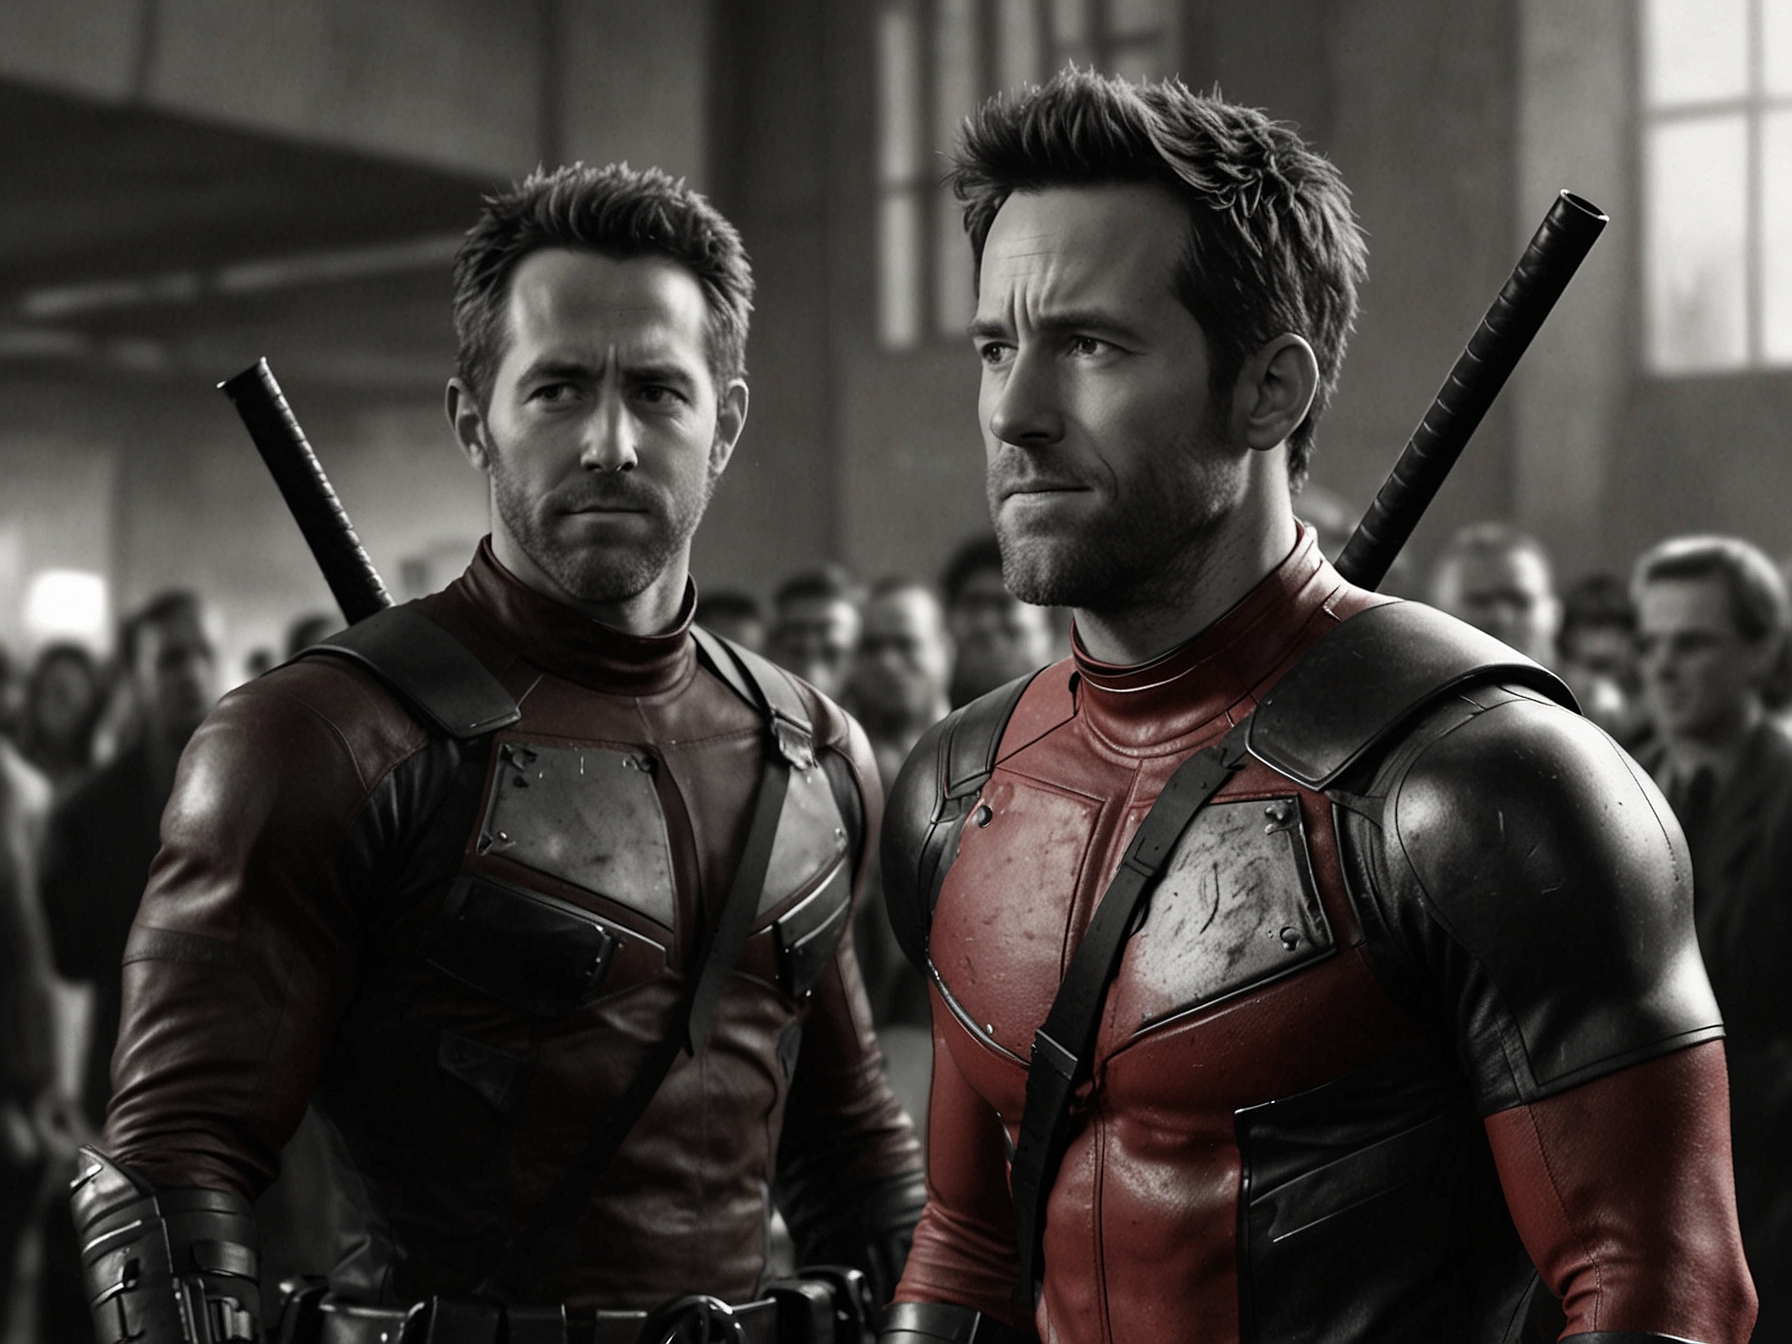 Ryan Reynolds and Hugh Jackman at a Hollywood event, sparking excitement with the announcement of their Deadpool & Wolverine collaboration. Swift's rumored involvement adds to the anticipation.